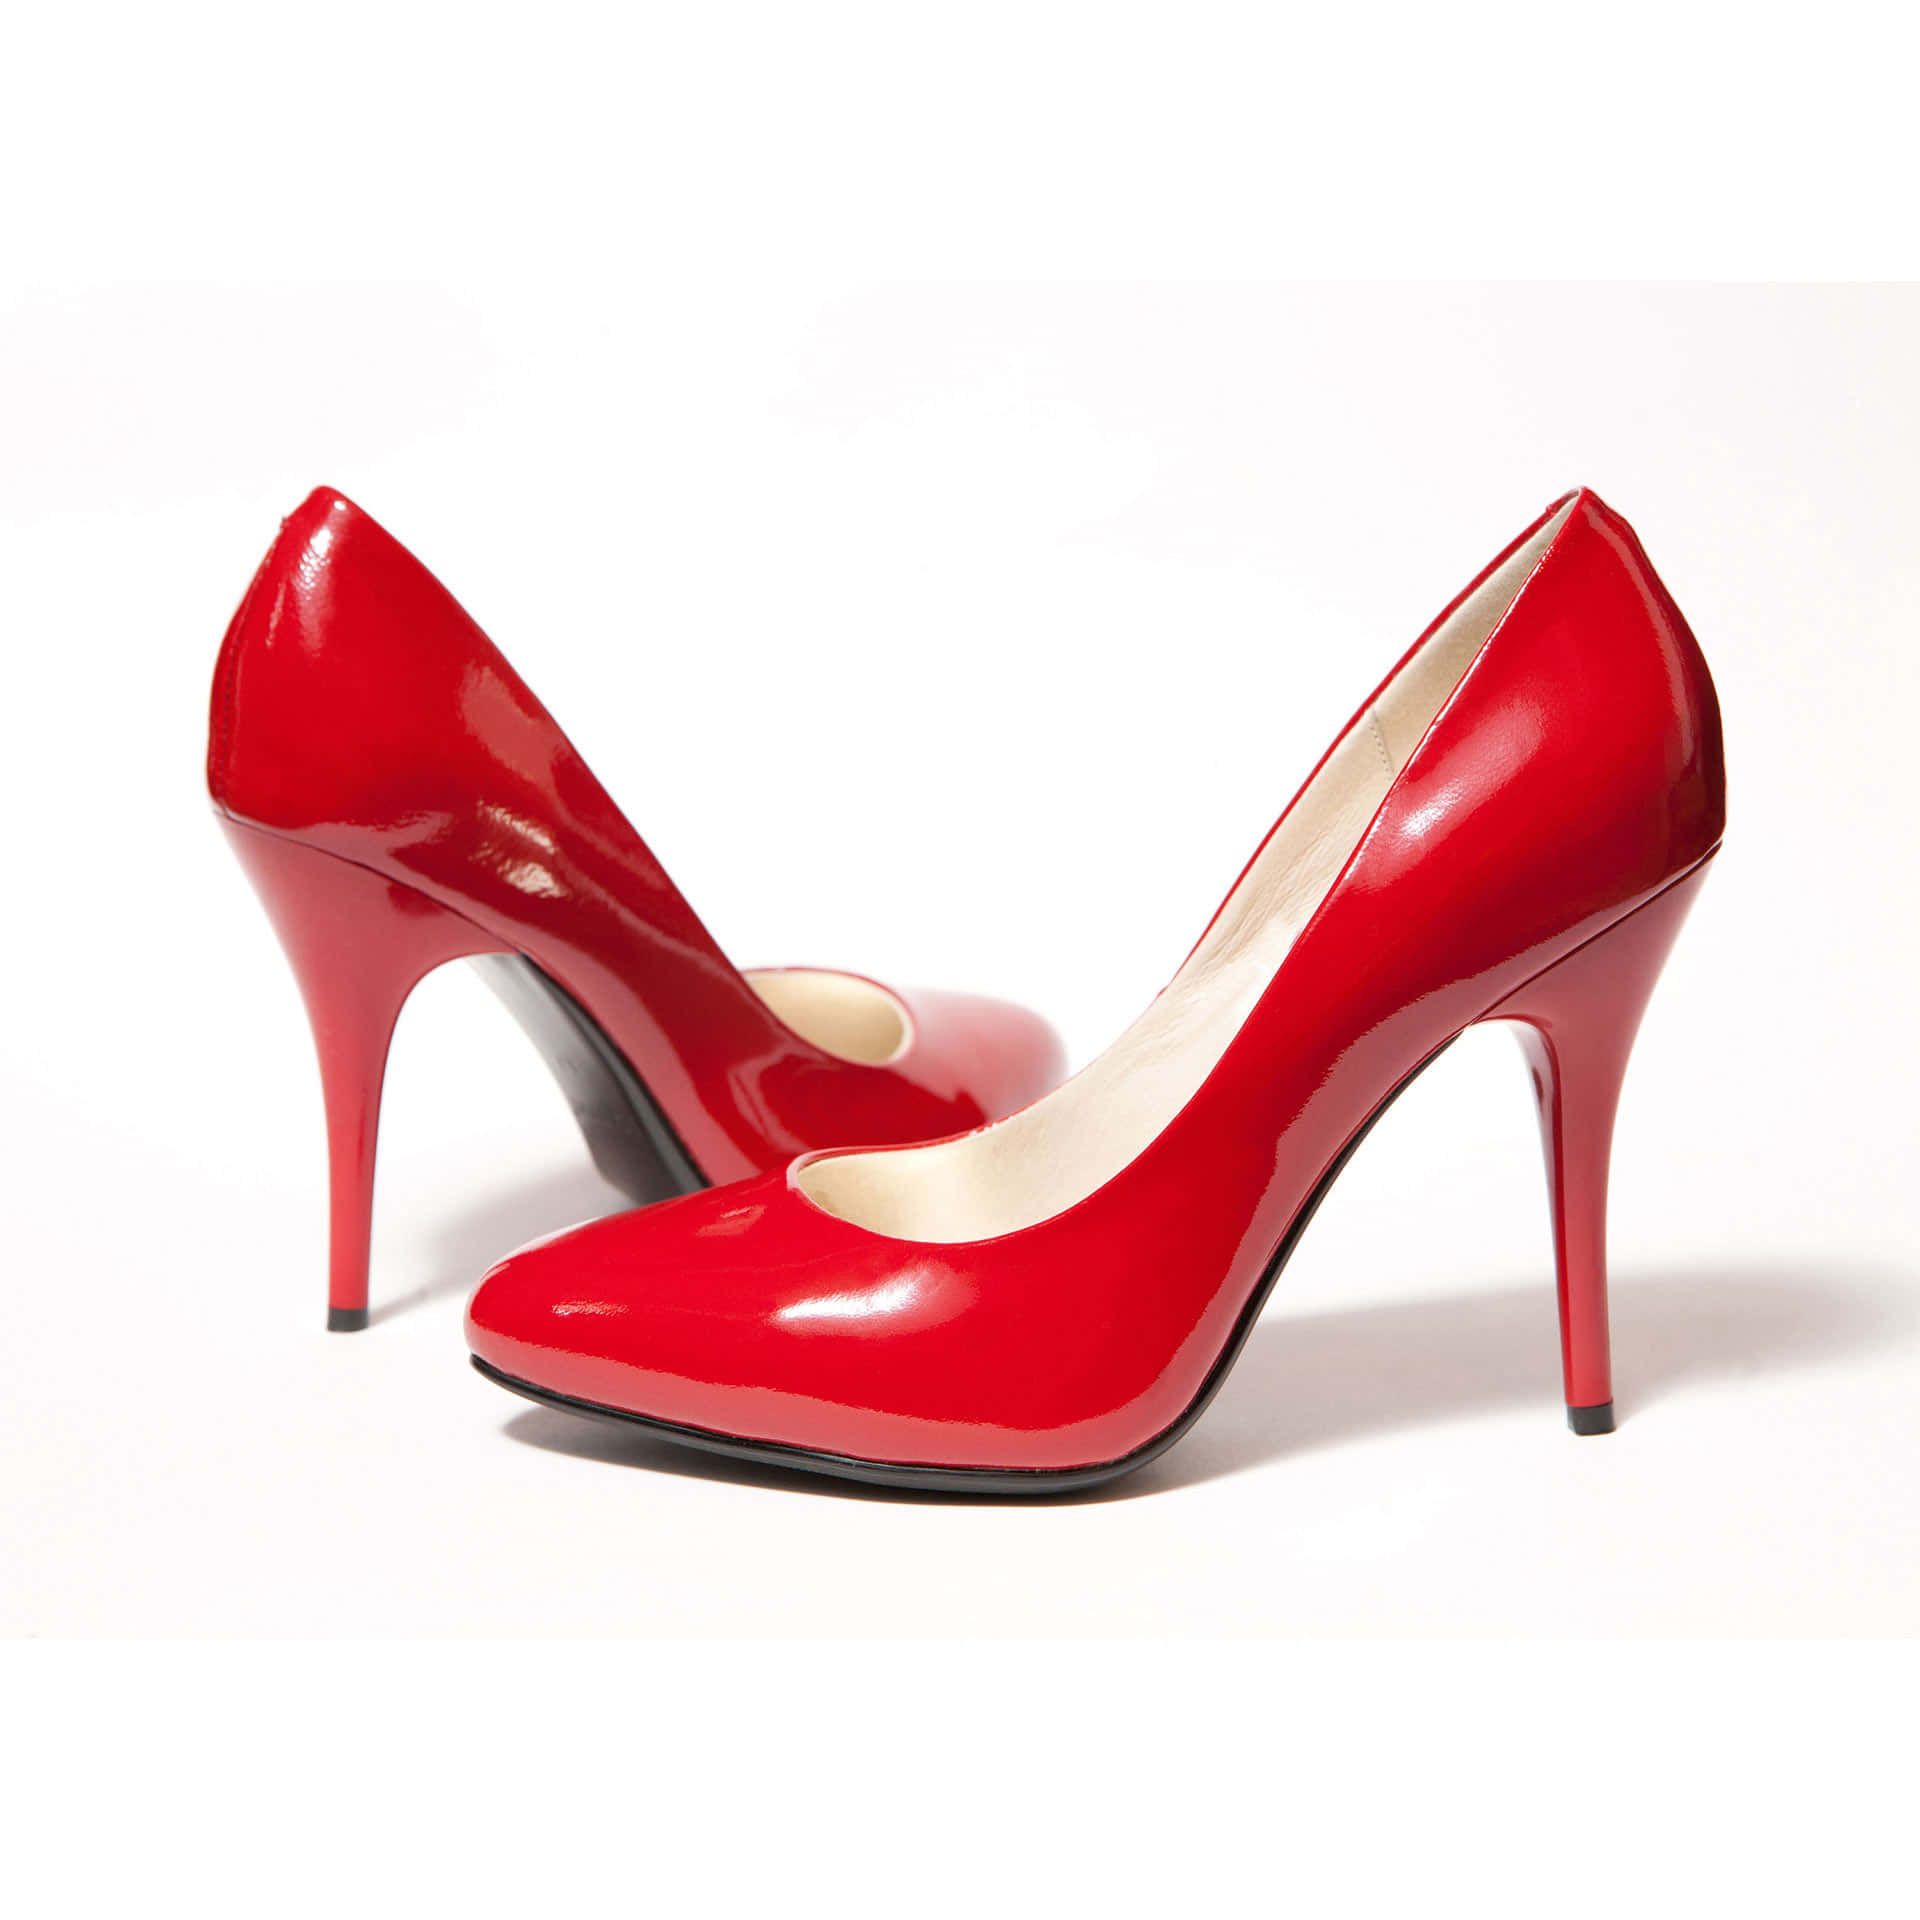 Stylish Red High Heels on a Black Surface Wallpaper